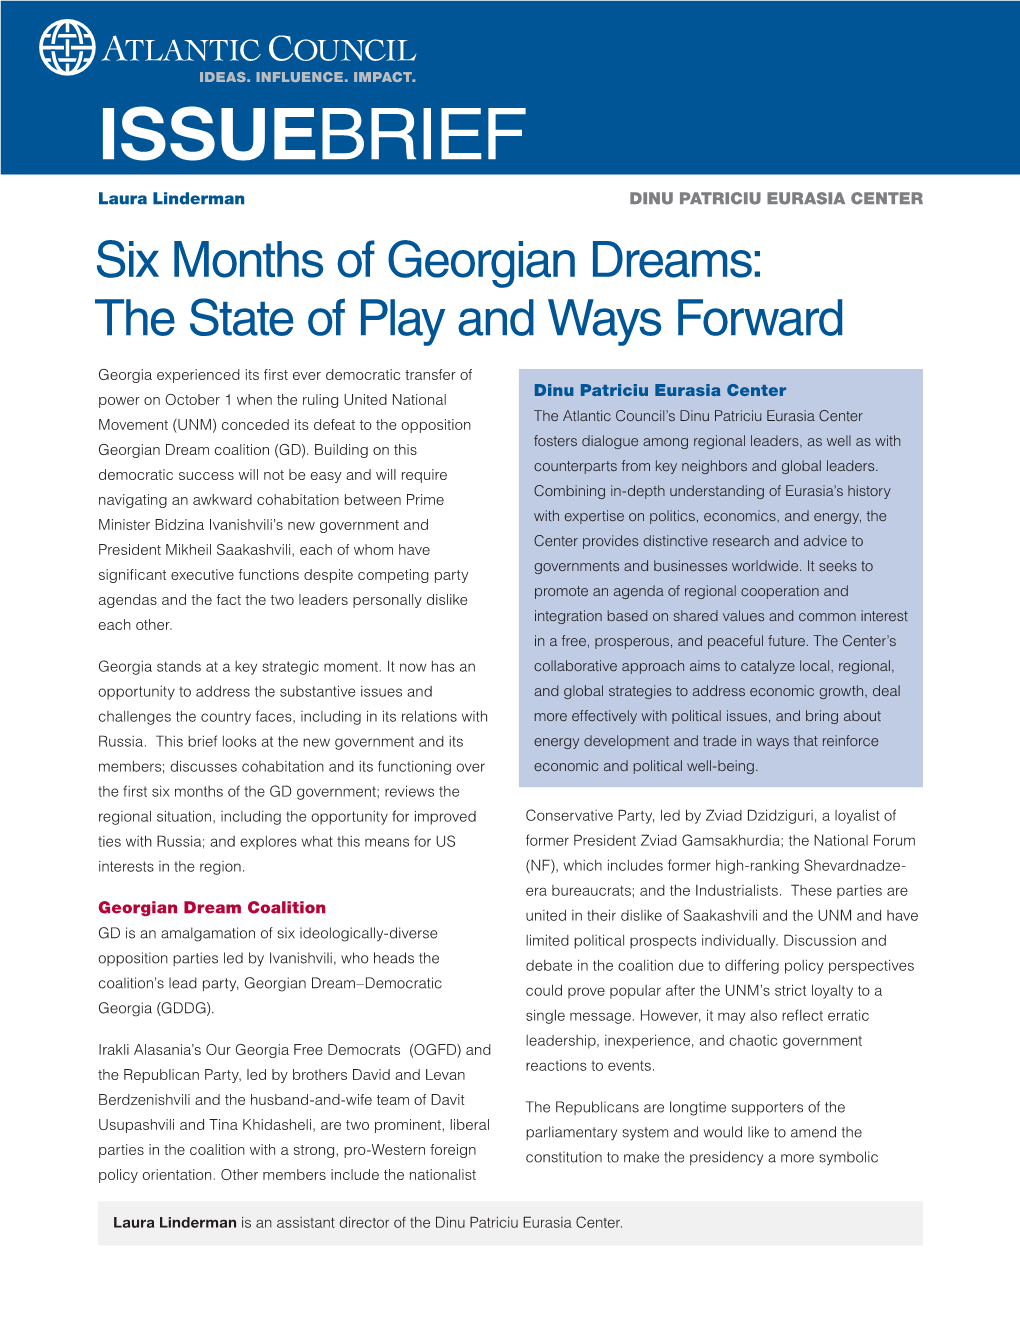 Six Months of Georgian Dreams: the State of Play and Ways Forward